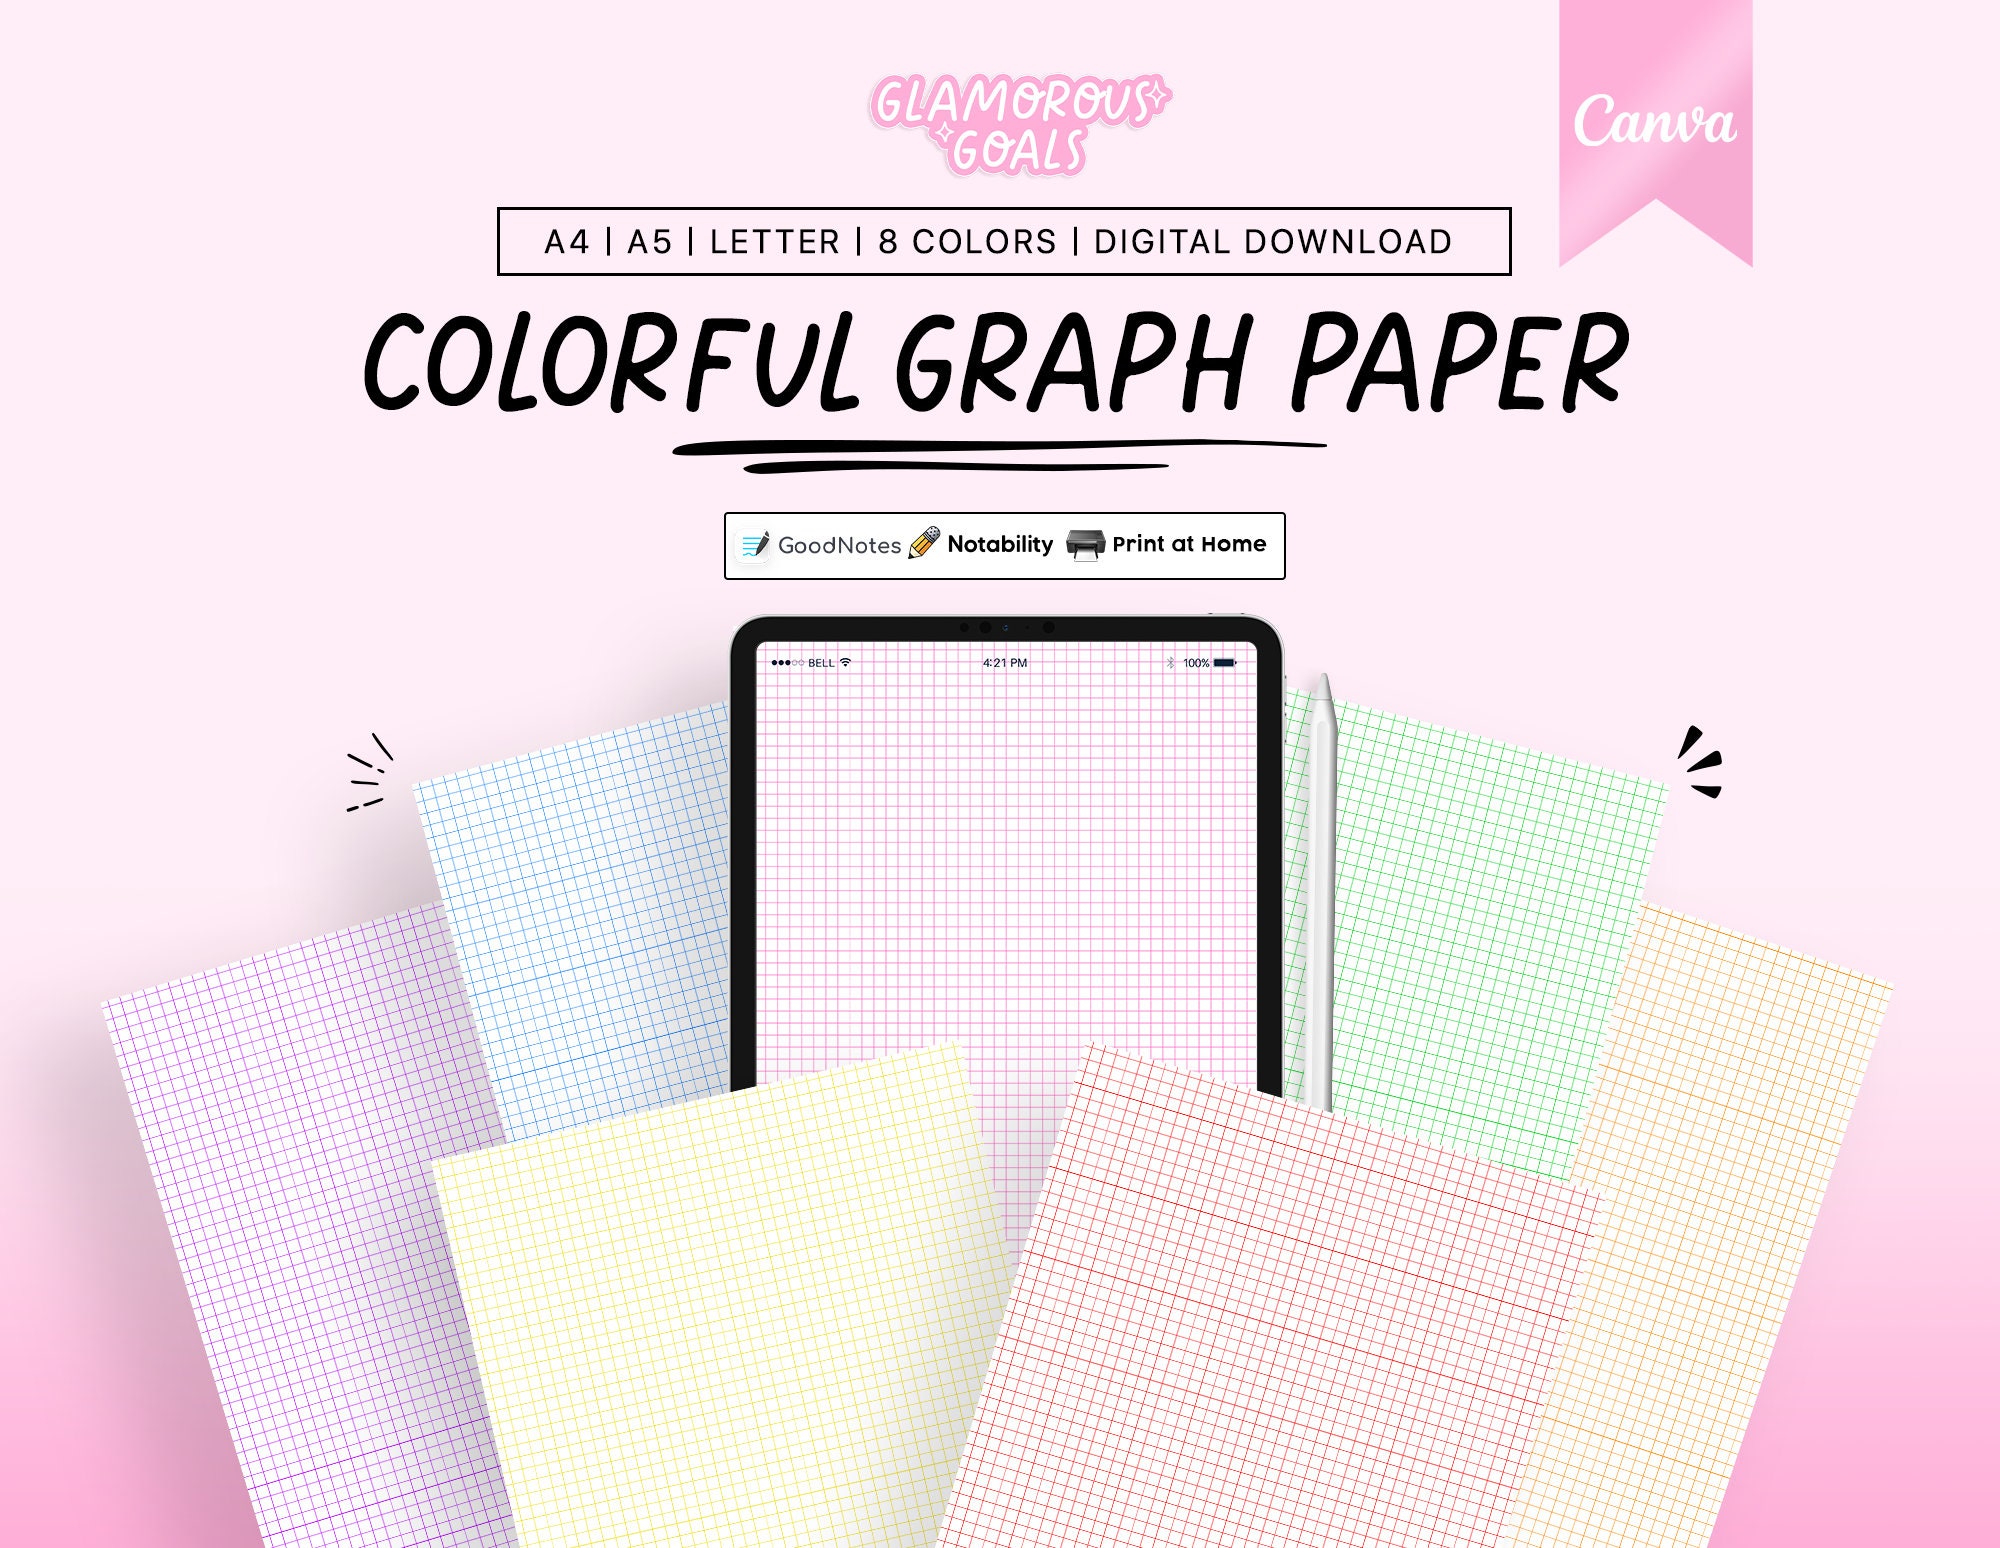 Graph Paper Notebook: (Large, 8.5x11) 100 Pages, 4 Squares per Inch, Math  and Science Graph Paper Composition Notebook for Students a book by Blank  Classic